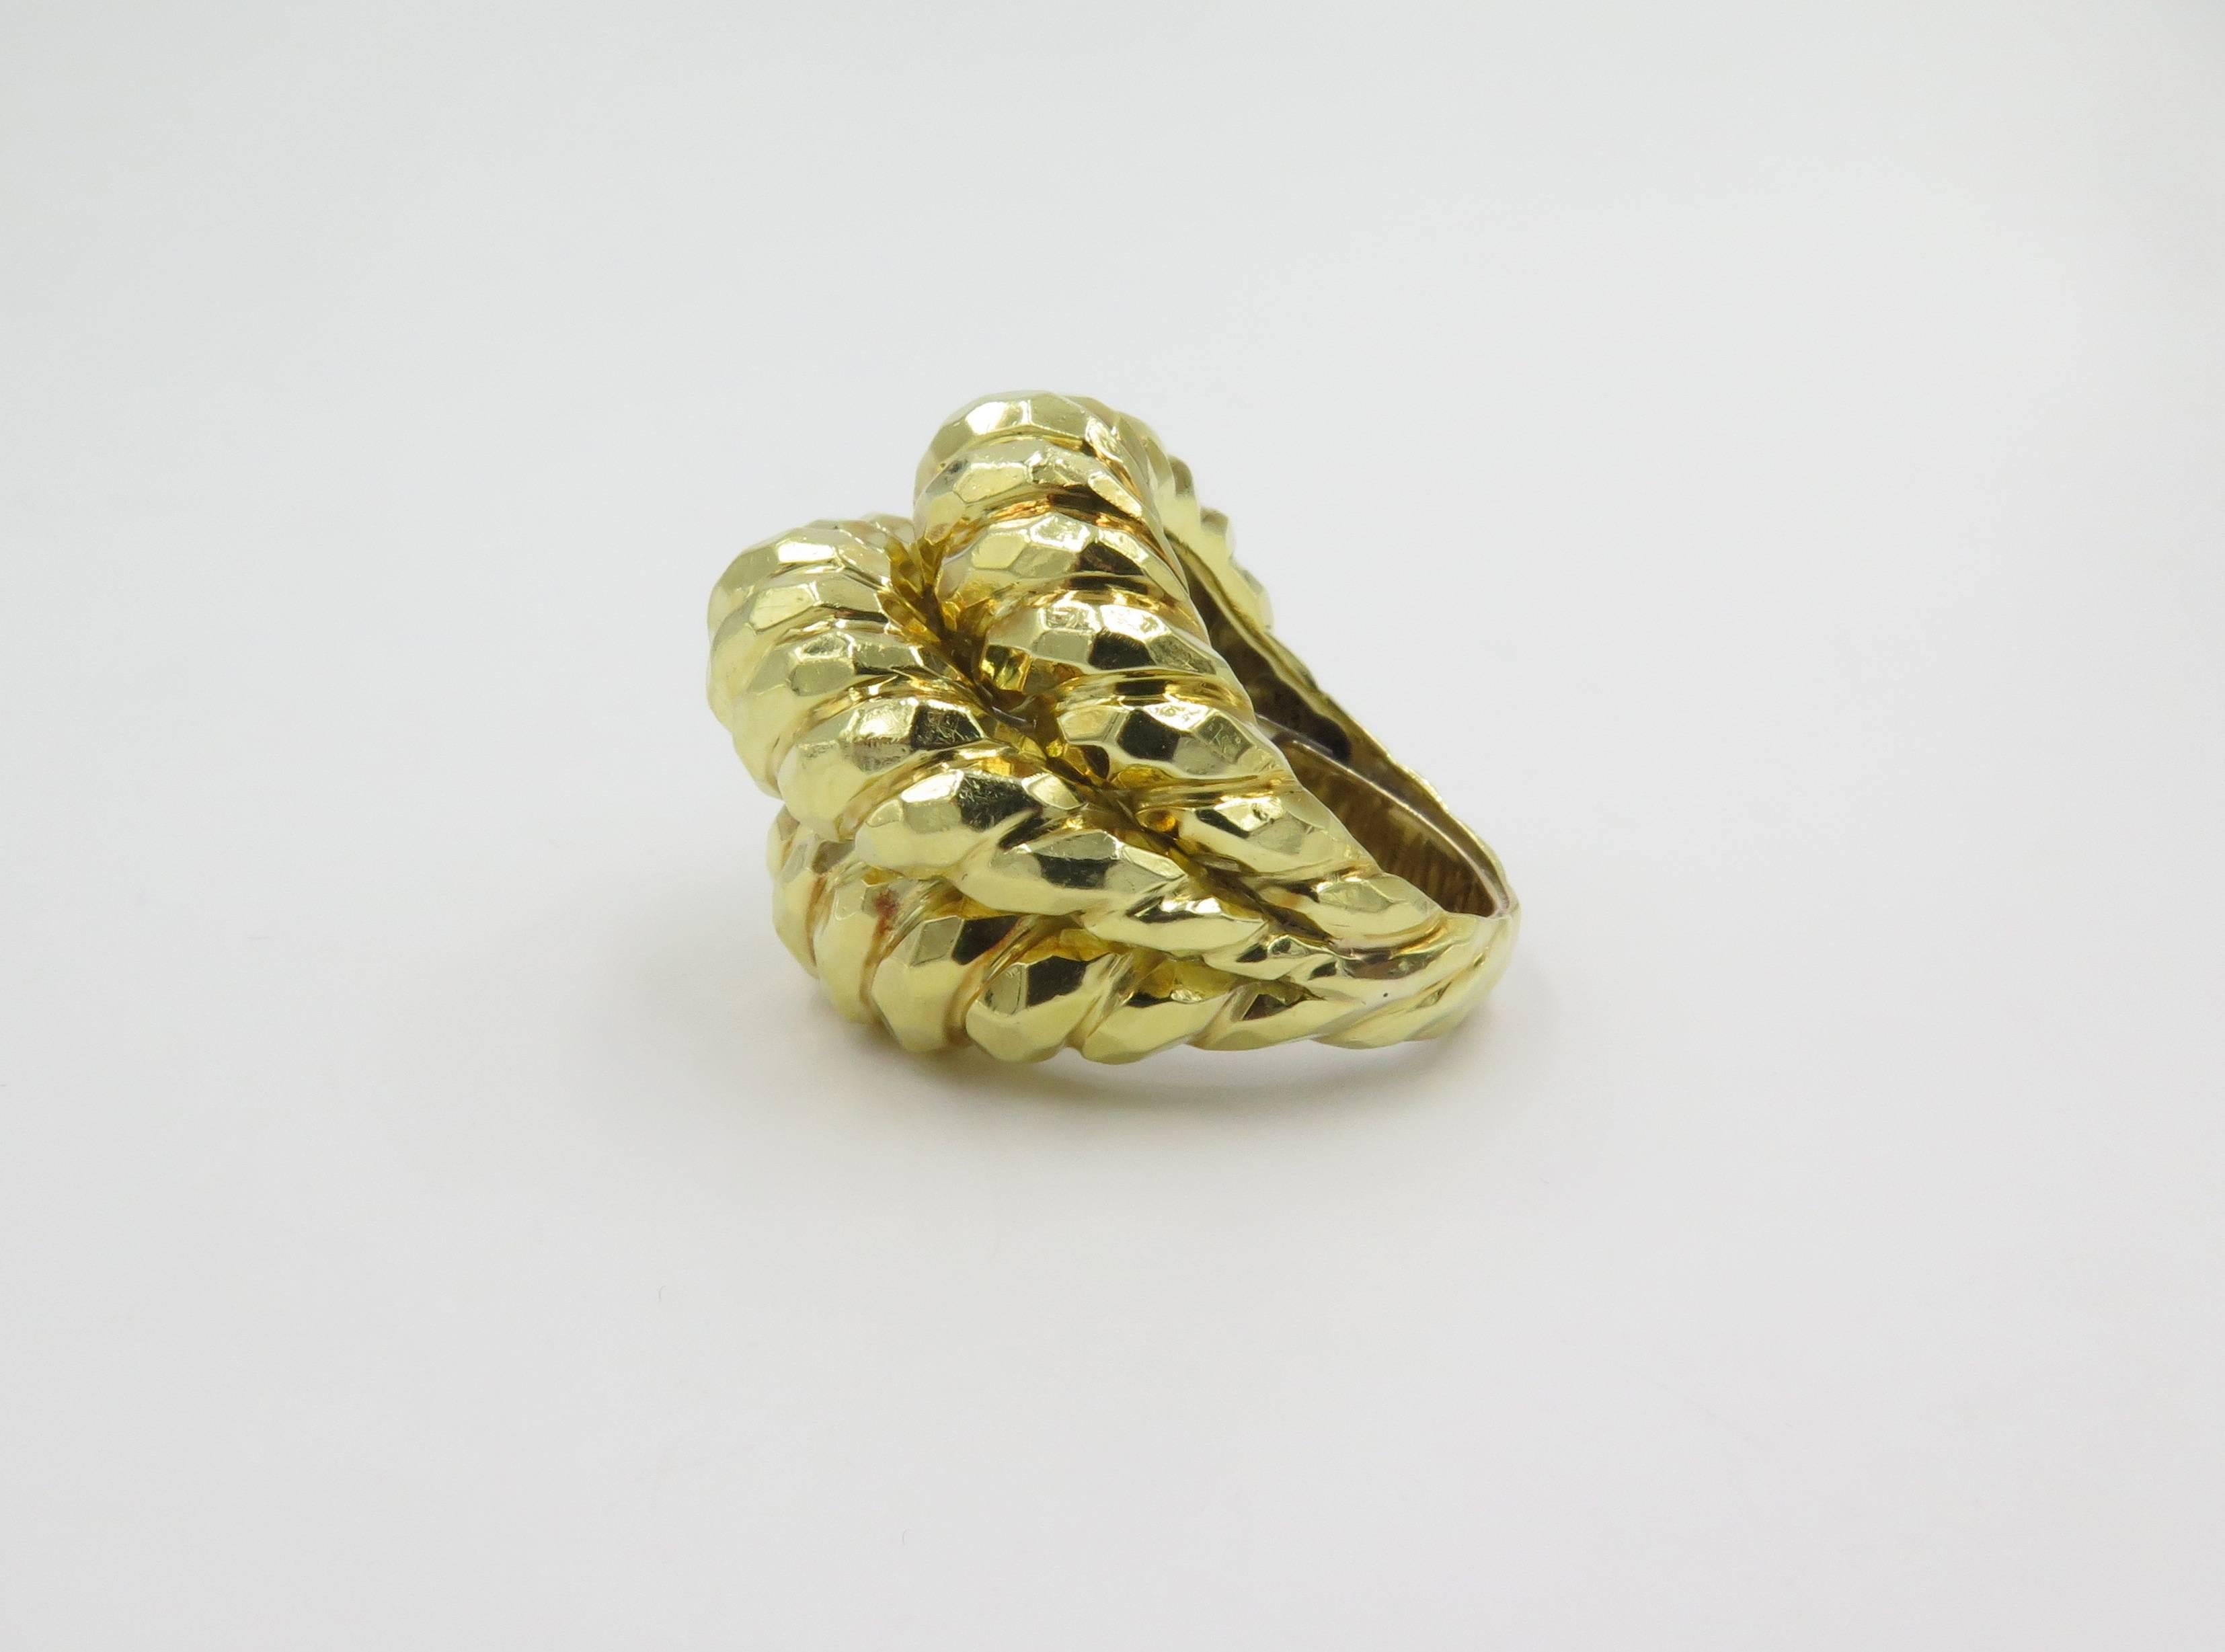 An 18 karat yellow gold ring. Henry Dunay. Designed as a fluted and hammered bombe dome. Size 7 1/2 with sizer. Gross weight is approximately 24.7 grams. 